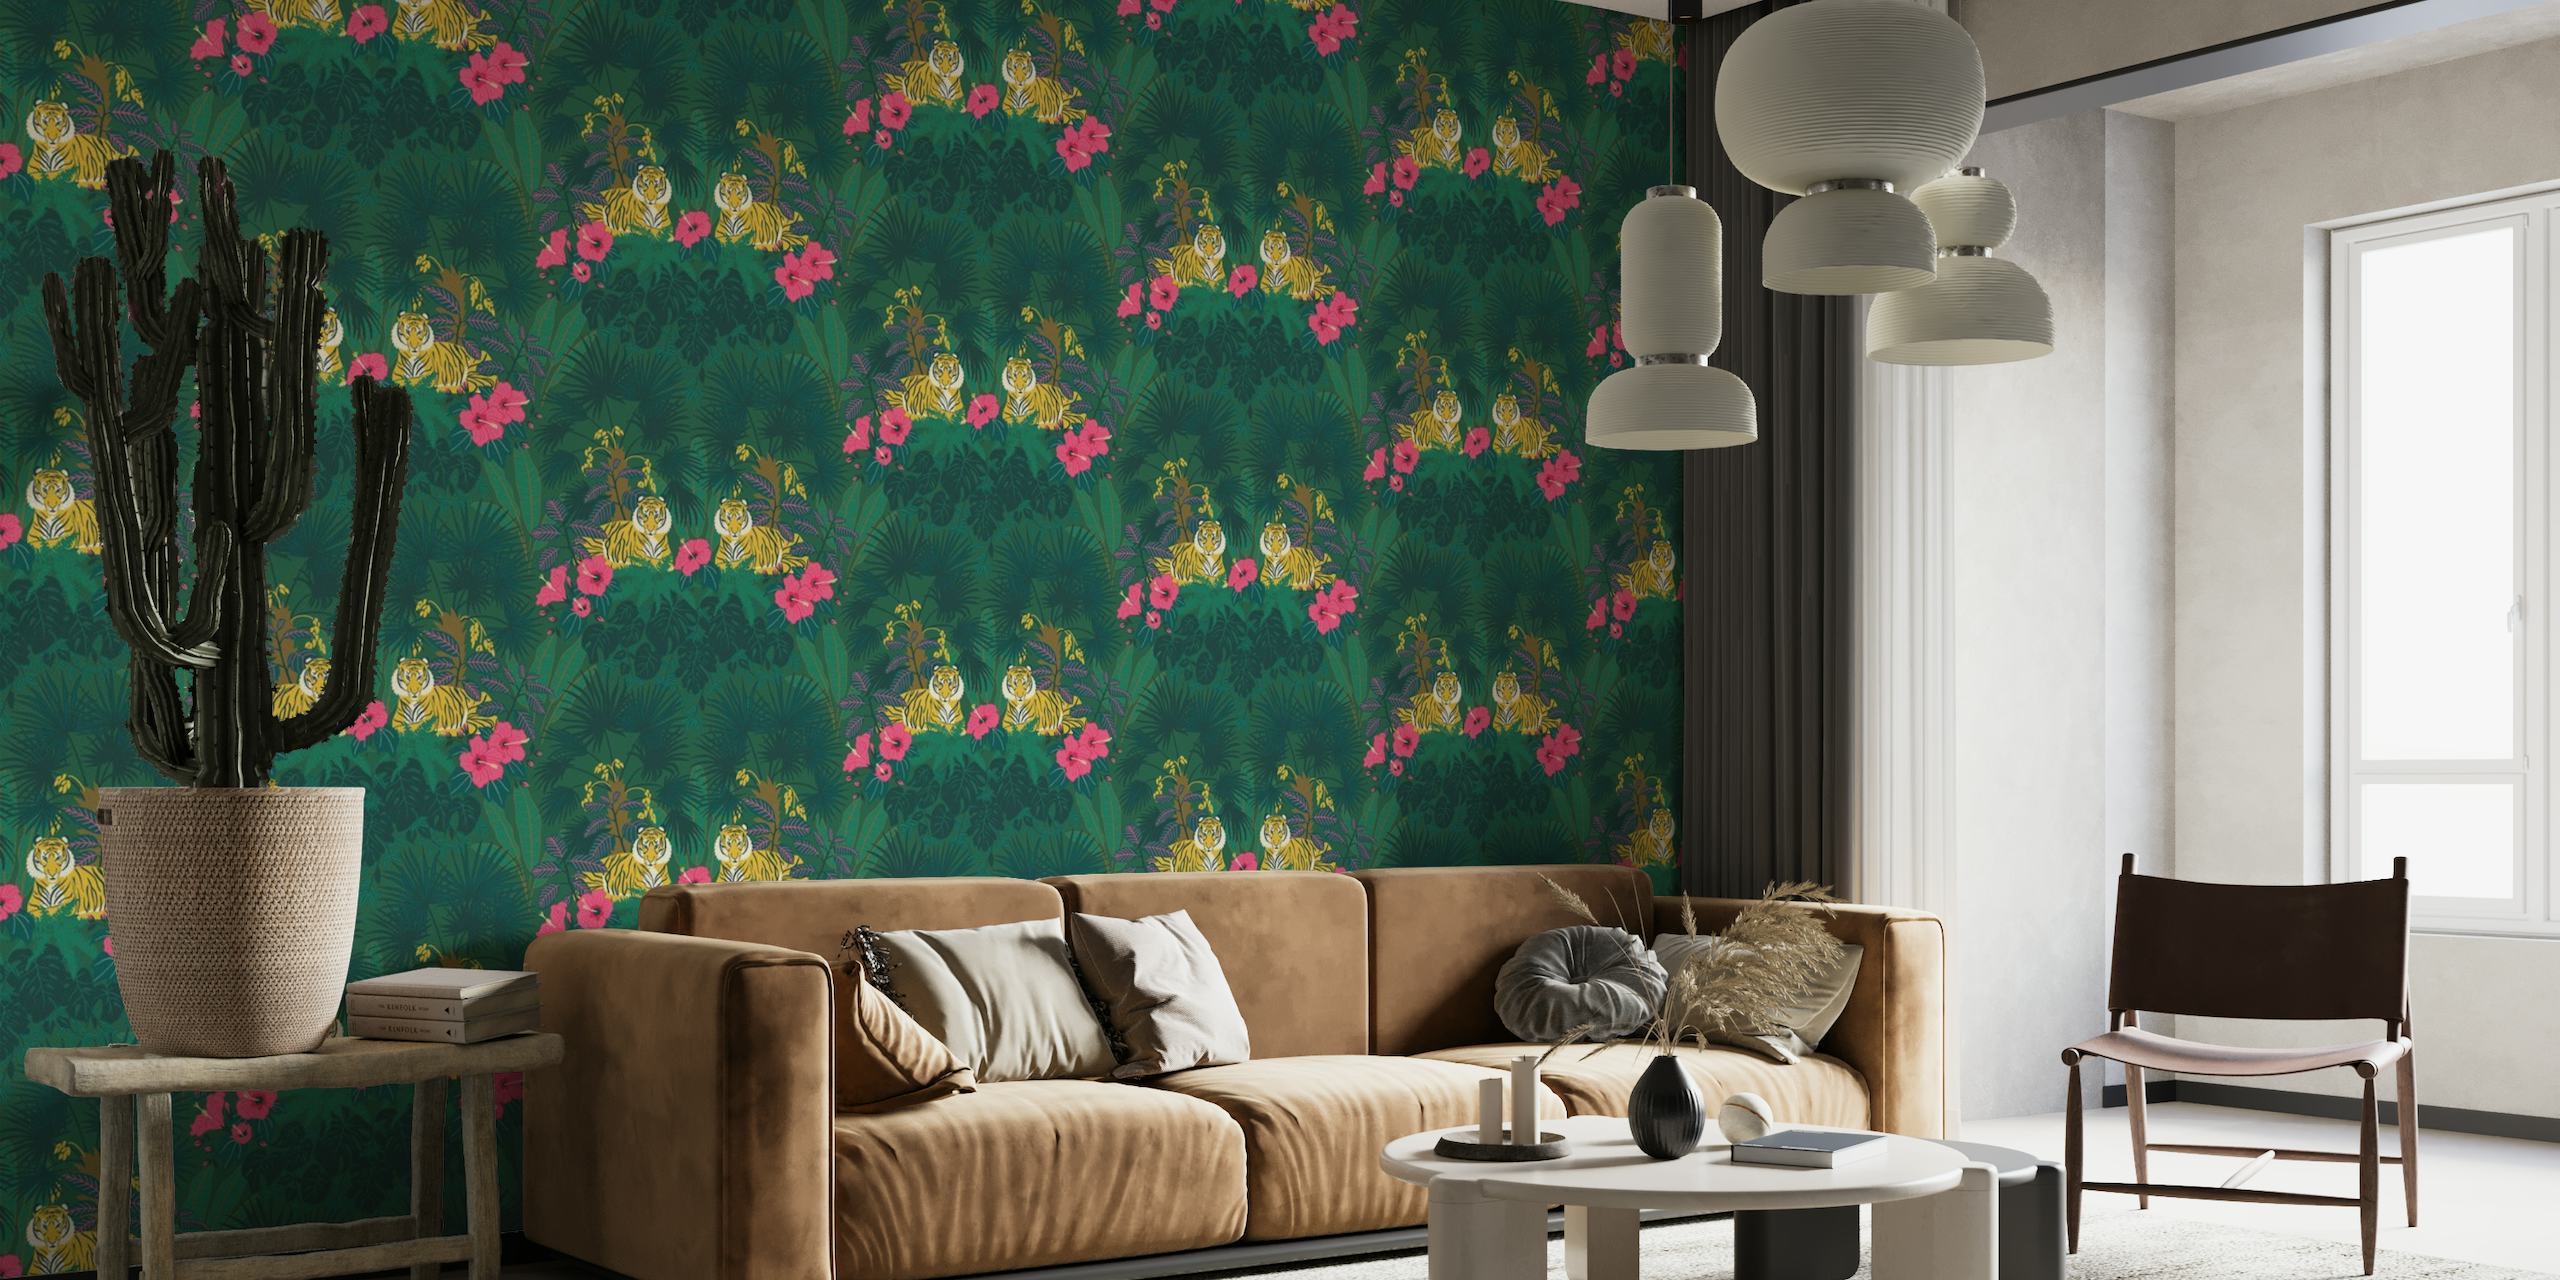 Proud Tiger - Javan Green - wall mural showcasing tigers, palm trees, monstera, and hibiscus on a green background